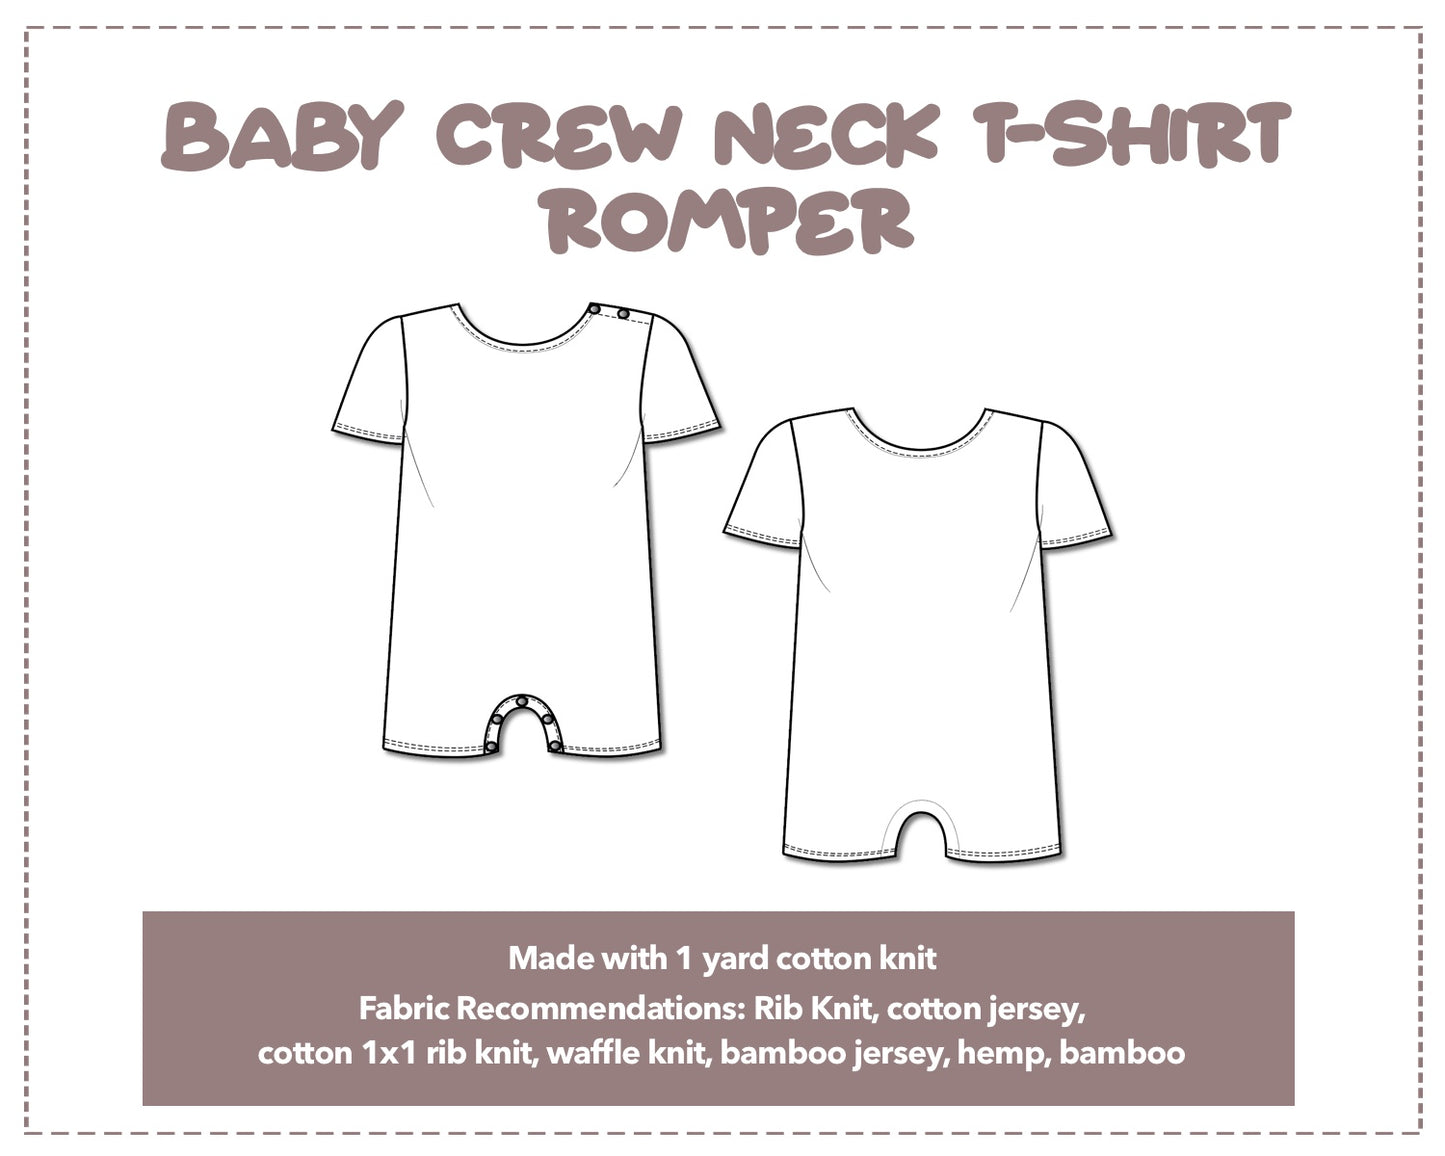 Illustration and detailed description for Baby Crew Neck T-Shirt Romper sewing pattern.